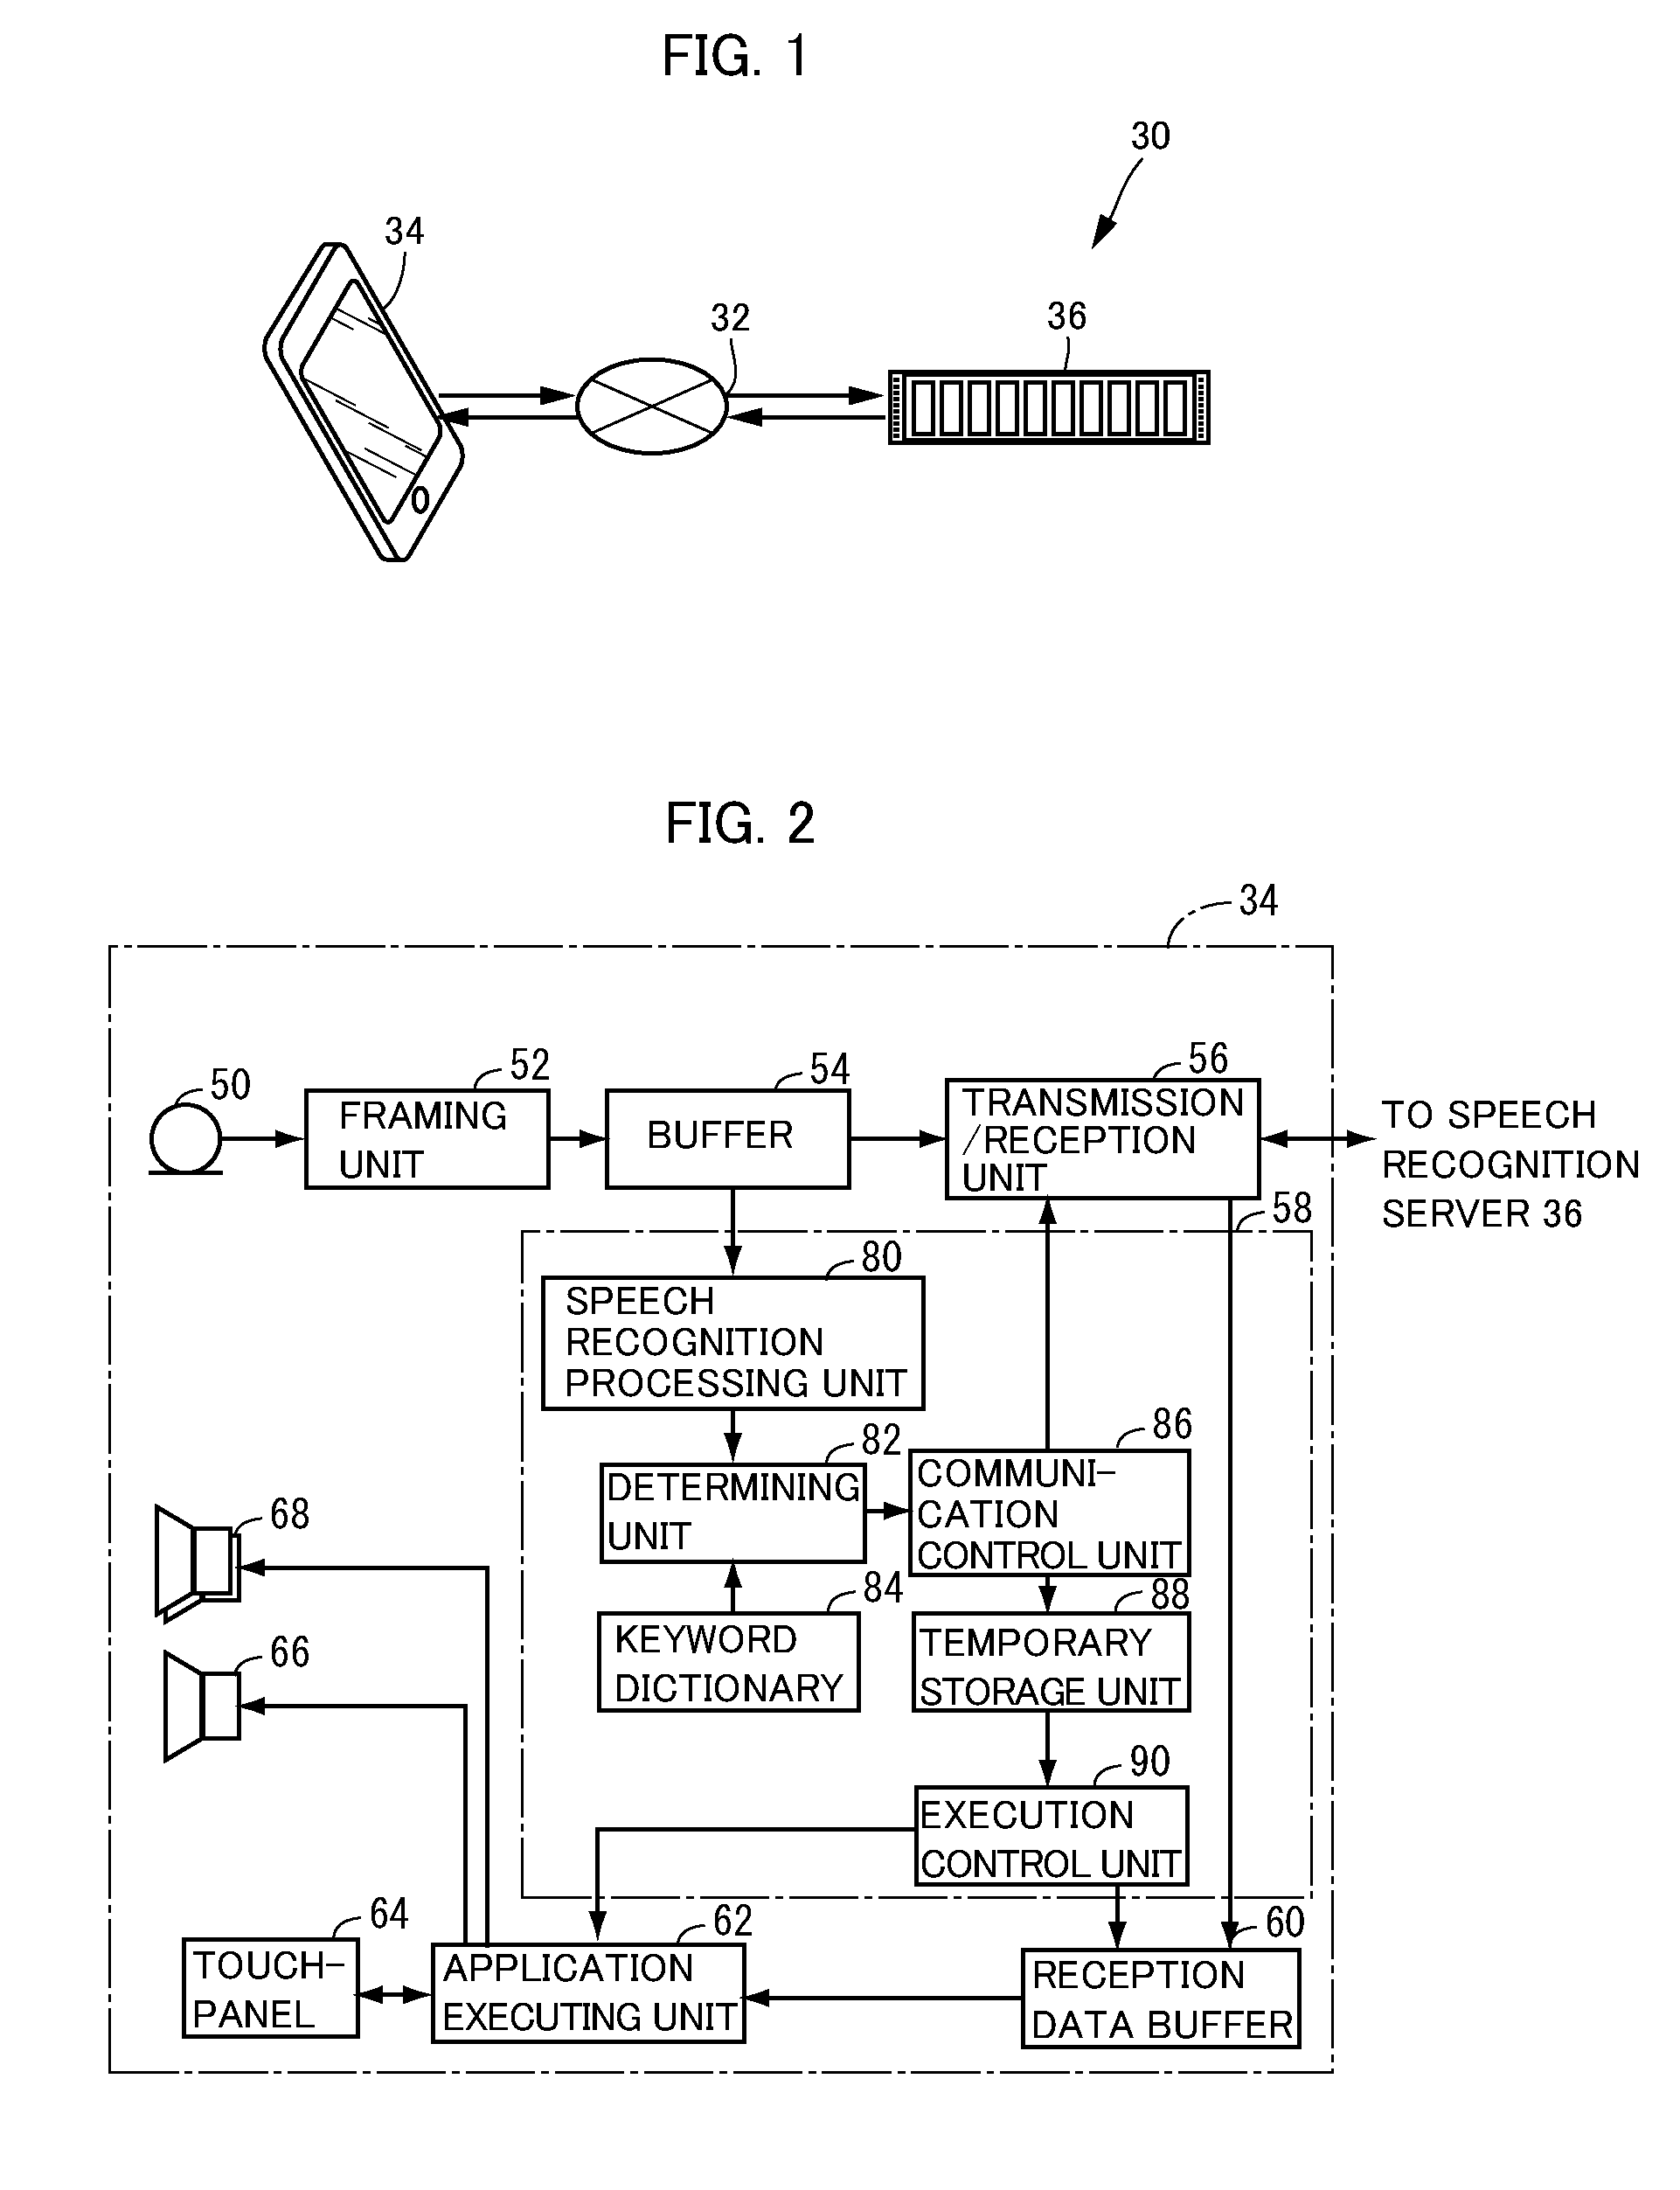 Speech recognition client apparatus performing local speech recognition